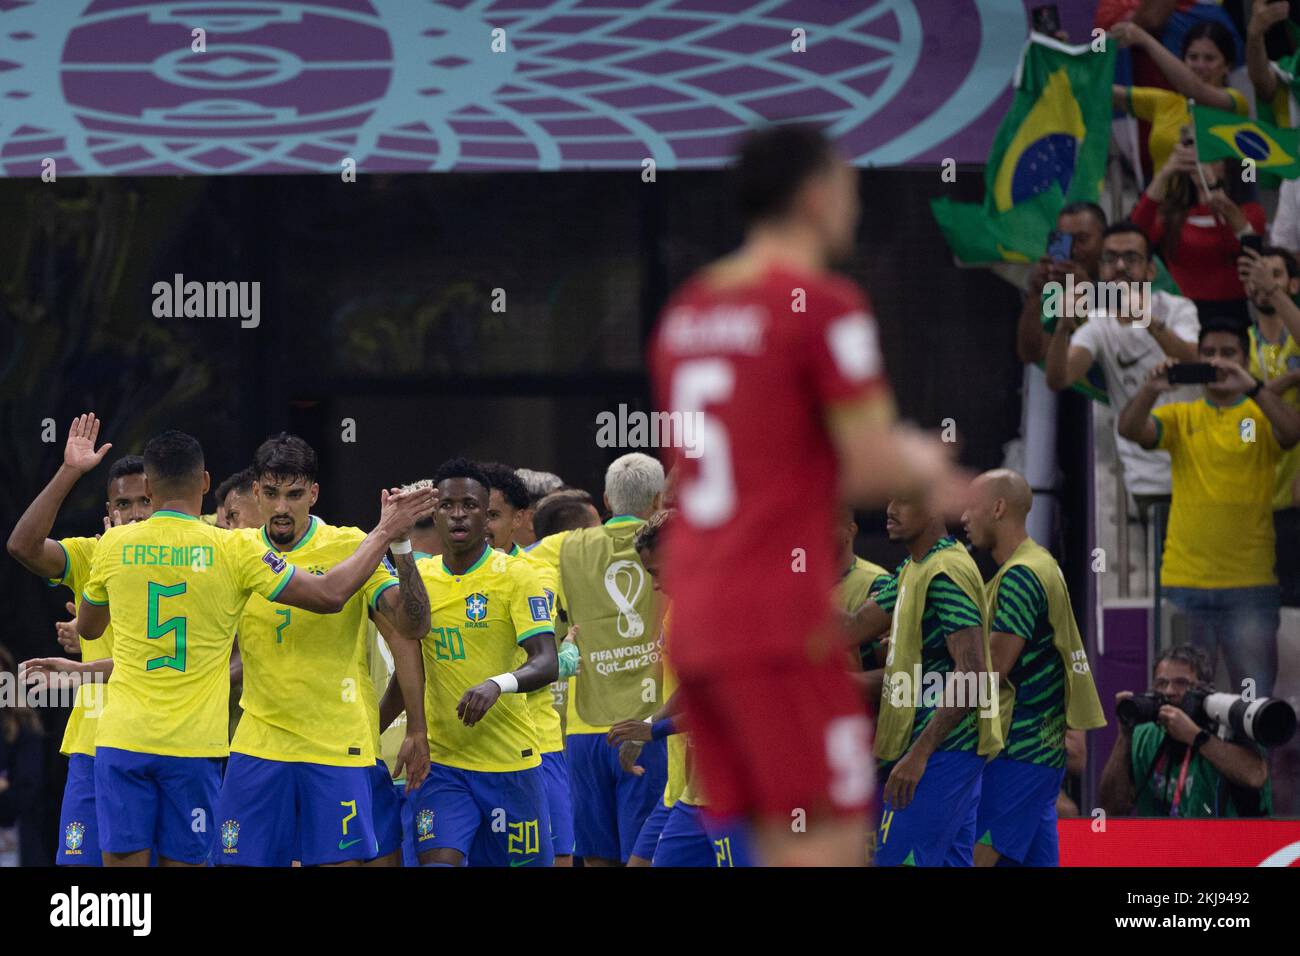 Al Wakrah, Brazil. 24th Nov, 2022. Qatar - Al-Wakrah - 11/24/2022 - 2022 WORLD CUP, BRAZIL X SERBIA - Players from Brazil celebrate their goal during a match against Serbia at the Lusail stadium for the 2022 World Cup championship. Photo: Pedro Martins/AGIF/Sipa USA Credit: Sipa USA/Alamy Live News Stock Photo